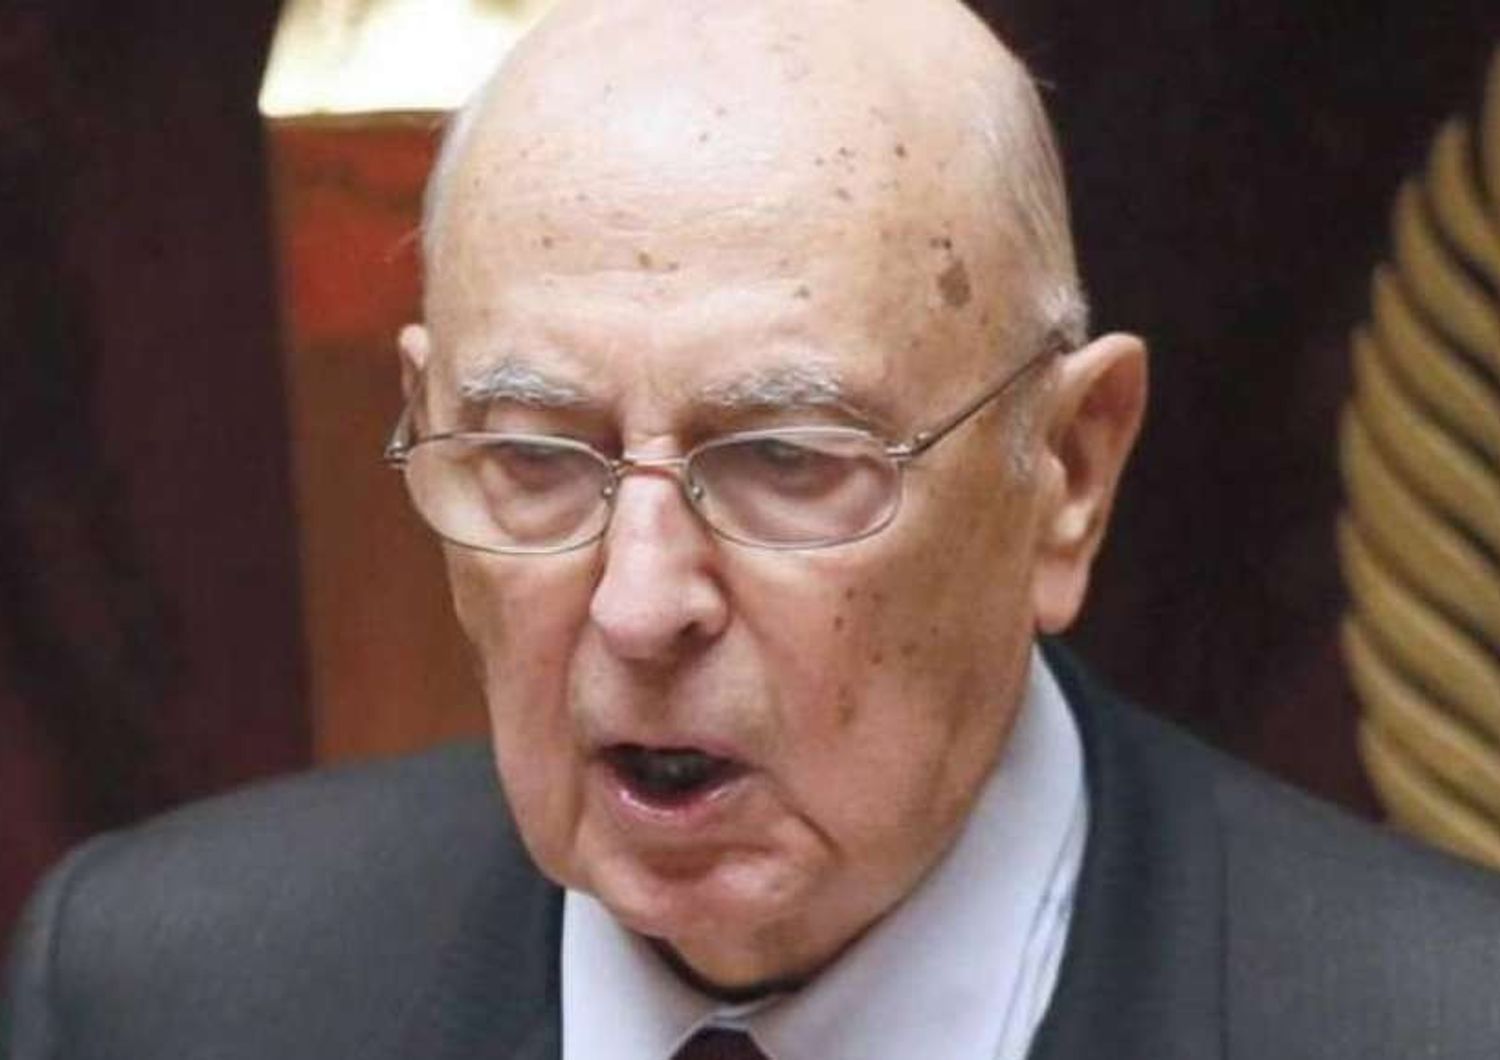 Palermo court to rule on Napolitano testimony in September